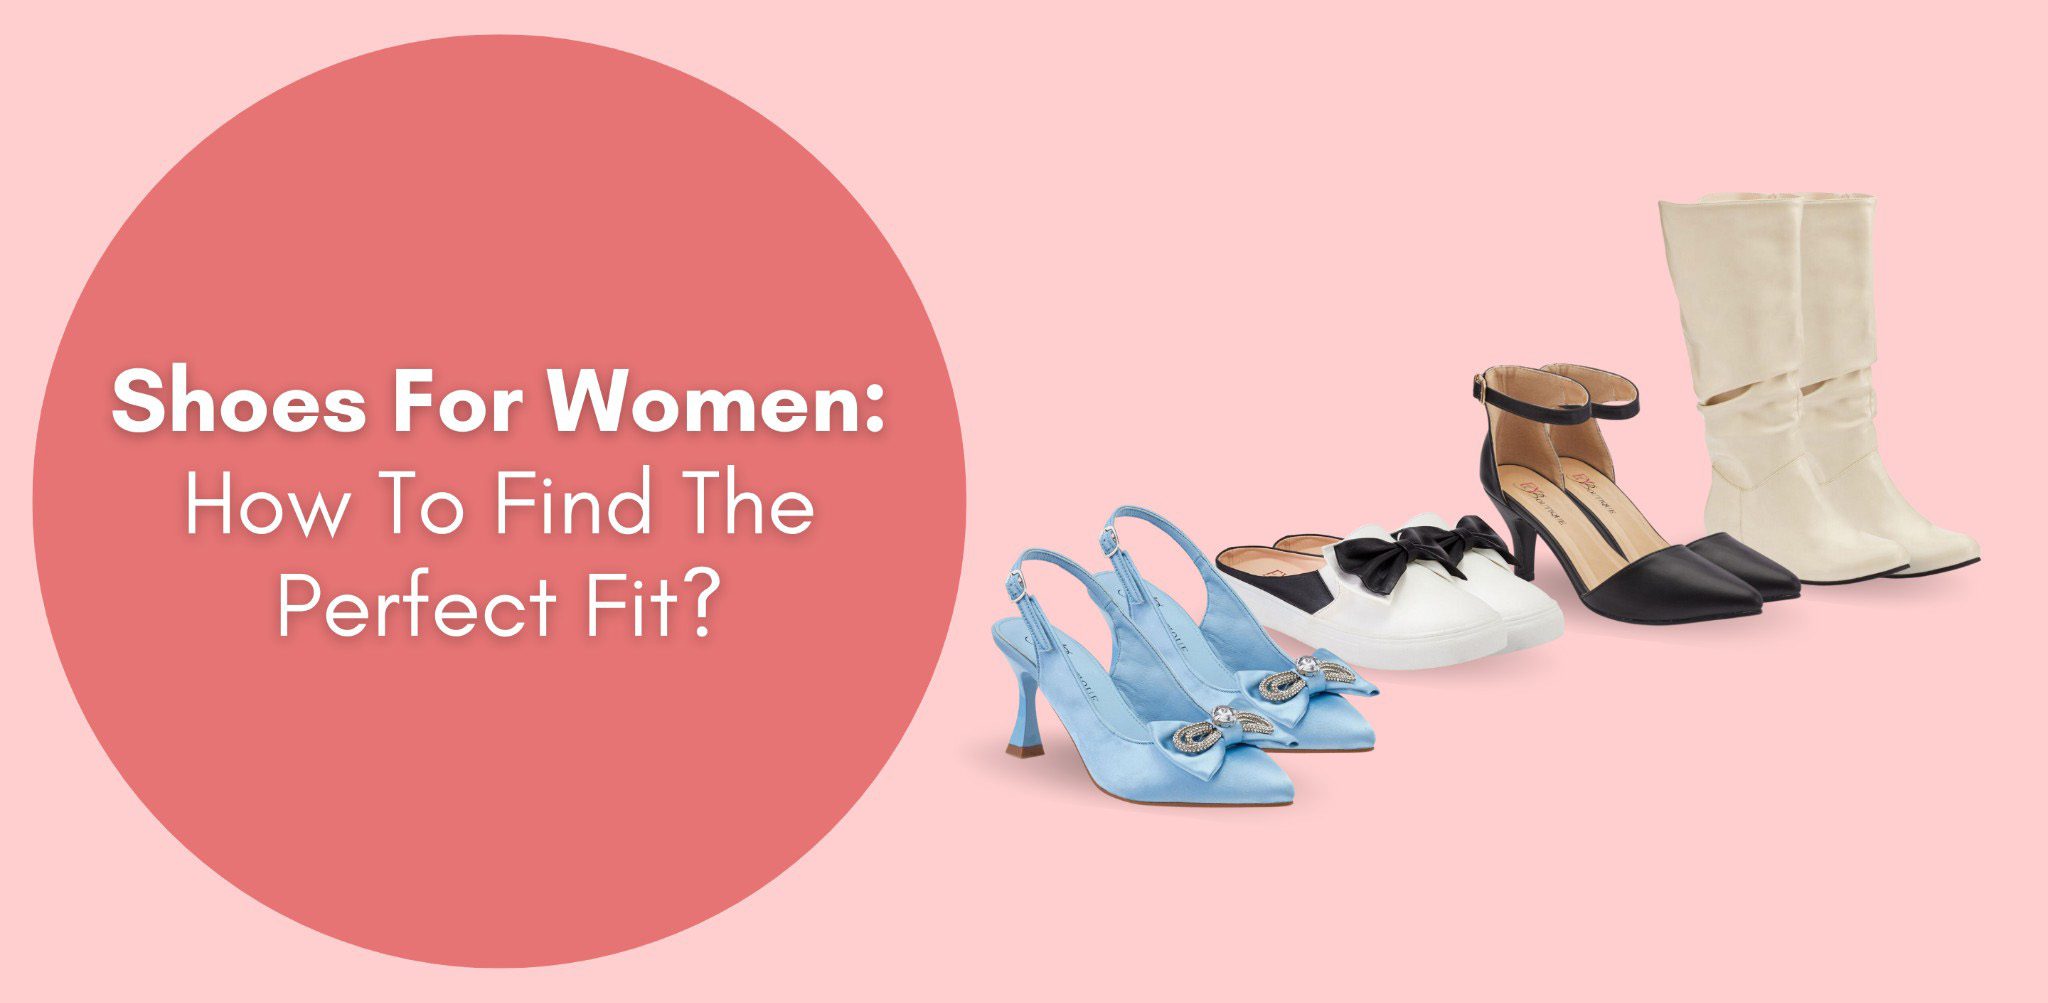 Shoes For Women: How To Find The Perfect Fit?